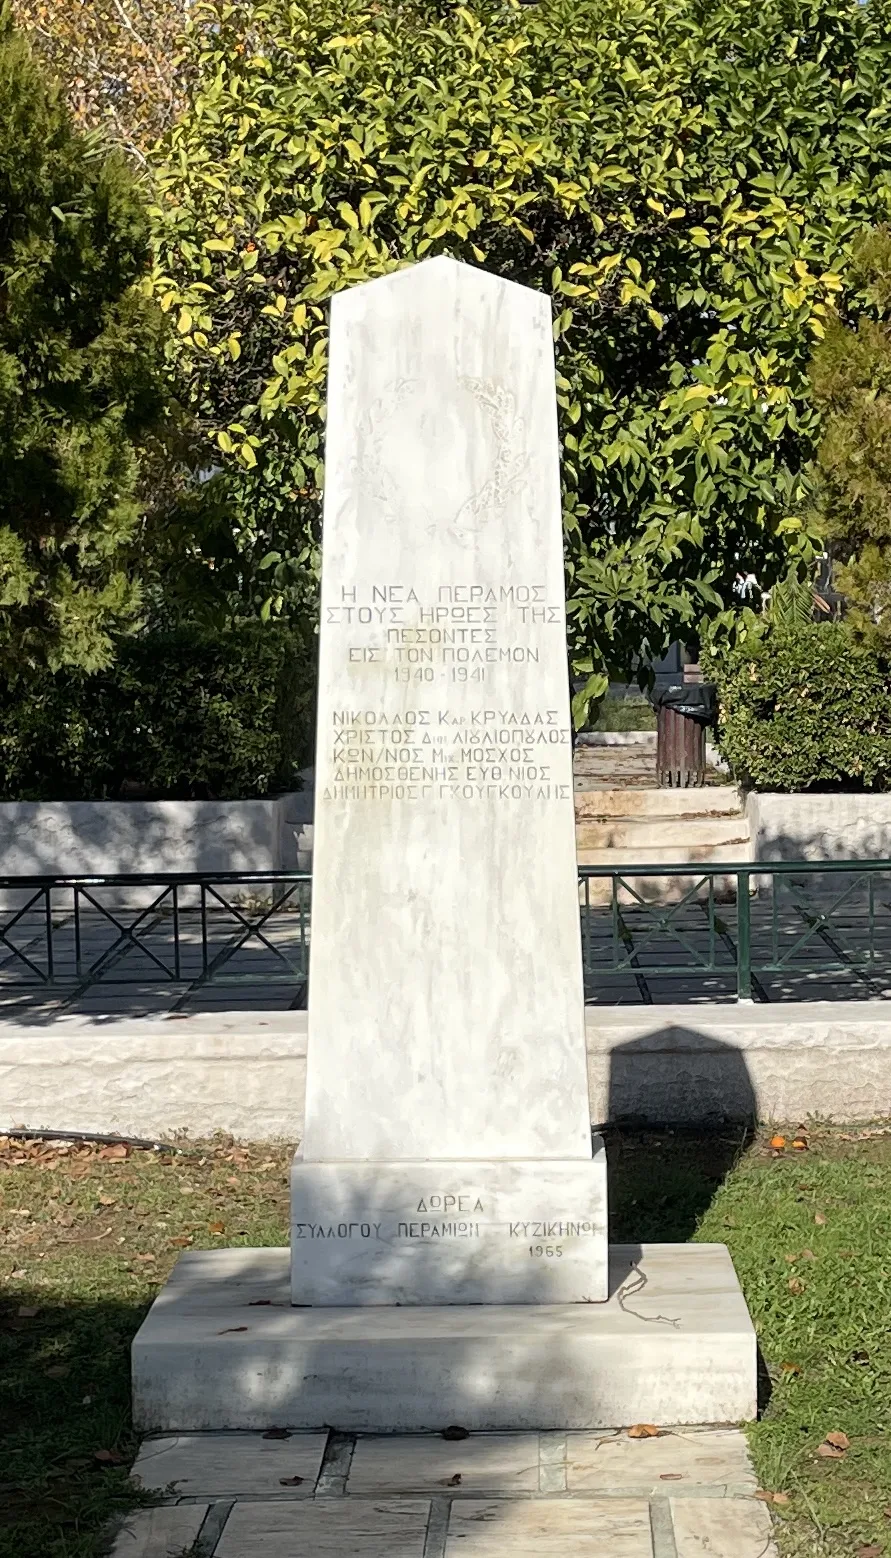 Photo showing: marble stele in public square commemorating local war dead with names